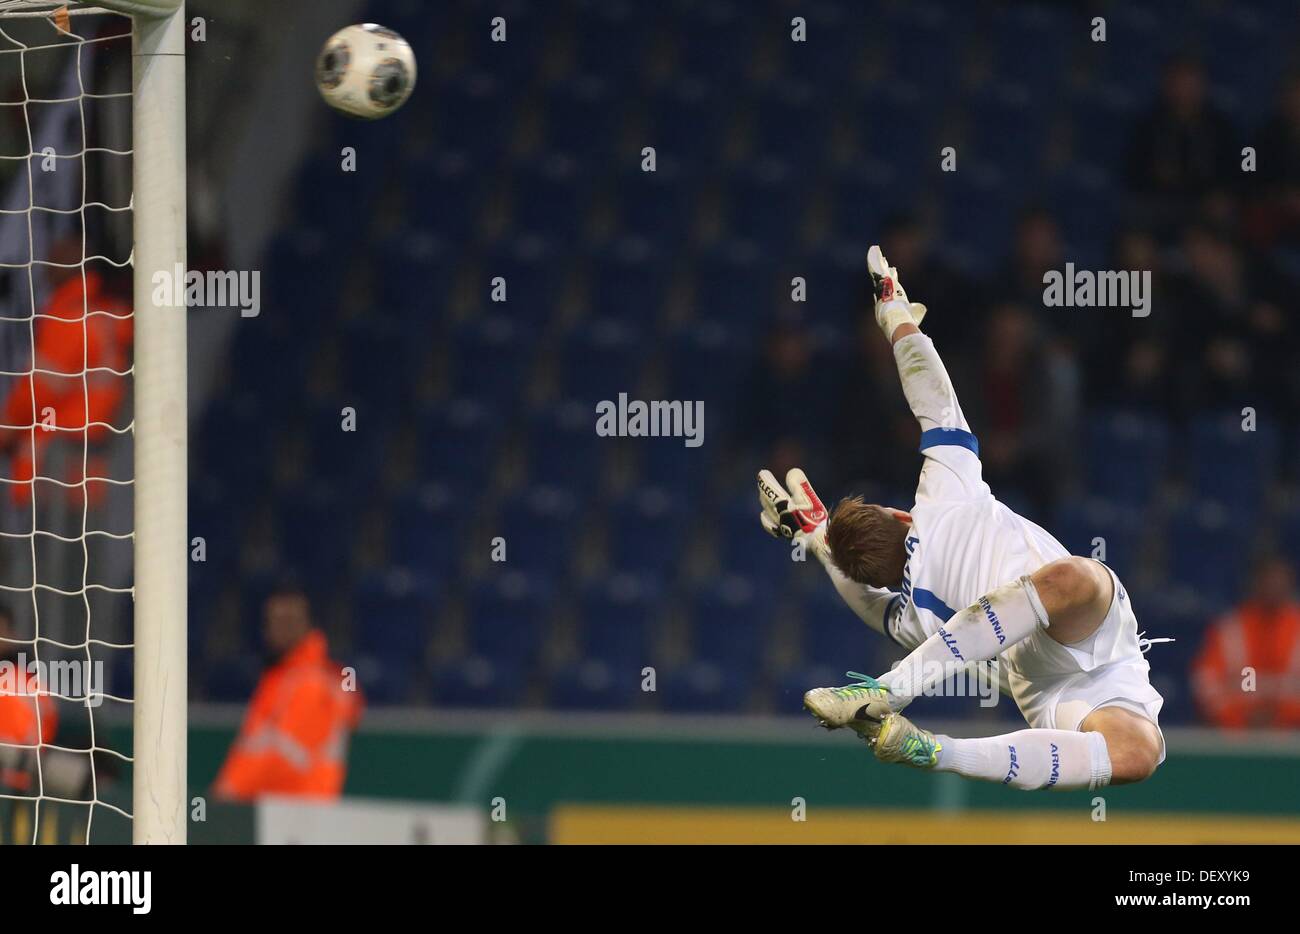 Bielefeld, Germany. 24th Sep, 2013. Bielefeld's goalkeeper Patrick Platins during the DFB Cup match between Arminia Bielefeld and Bayer Leverkusen at Schueco Arena in Bielefeld, Germany, 24 September 2013. Photo: FRISO GENTSCH/dpa/Alamy Live News Stock Photo